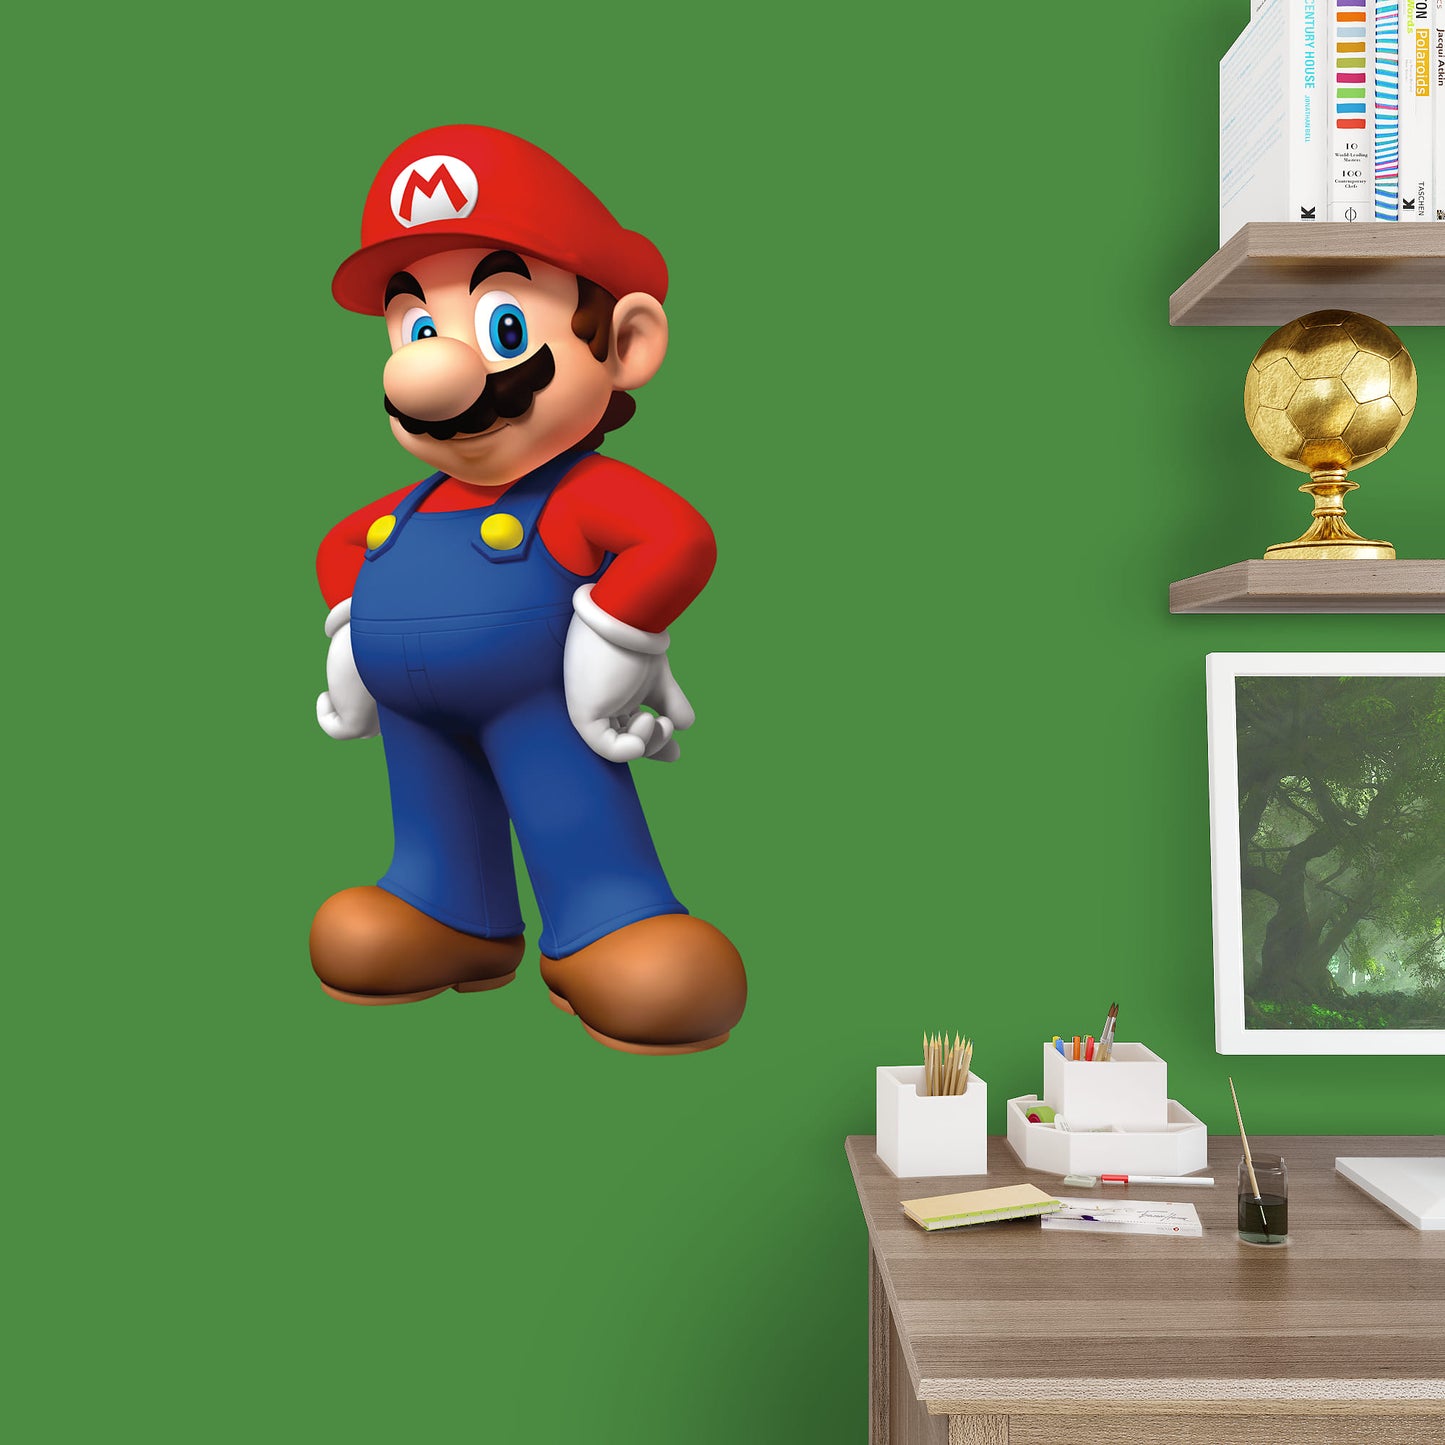 Mario��� - Officially Licensed Nintendo Removable Wall Decal